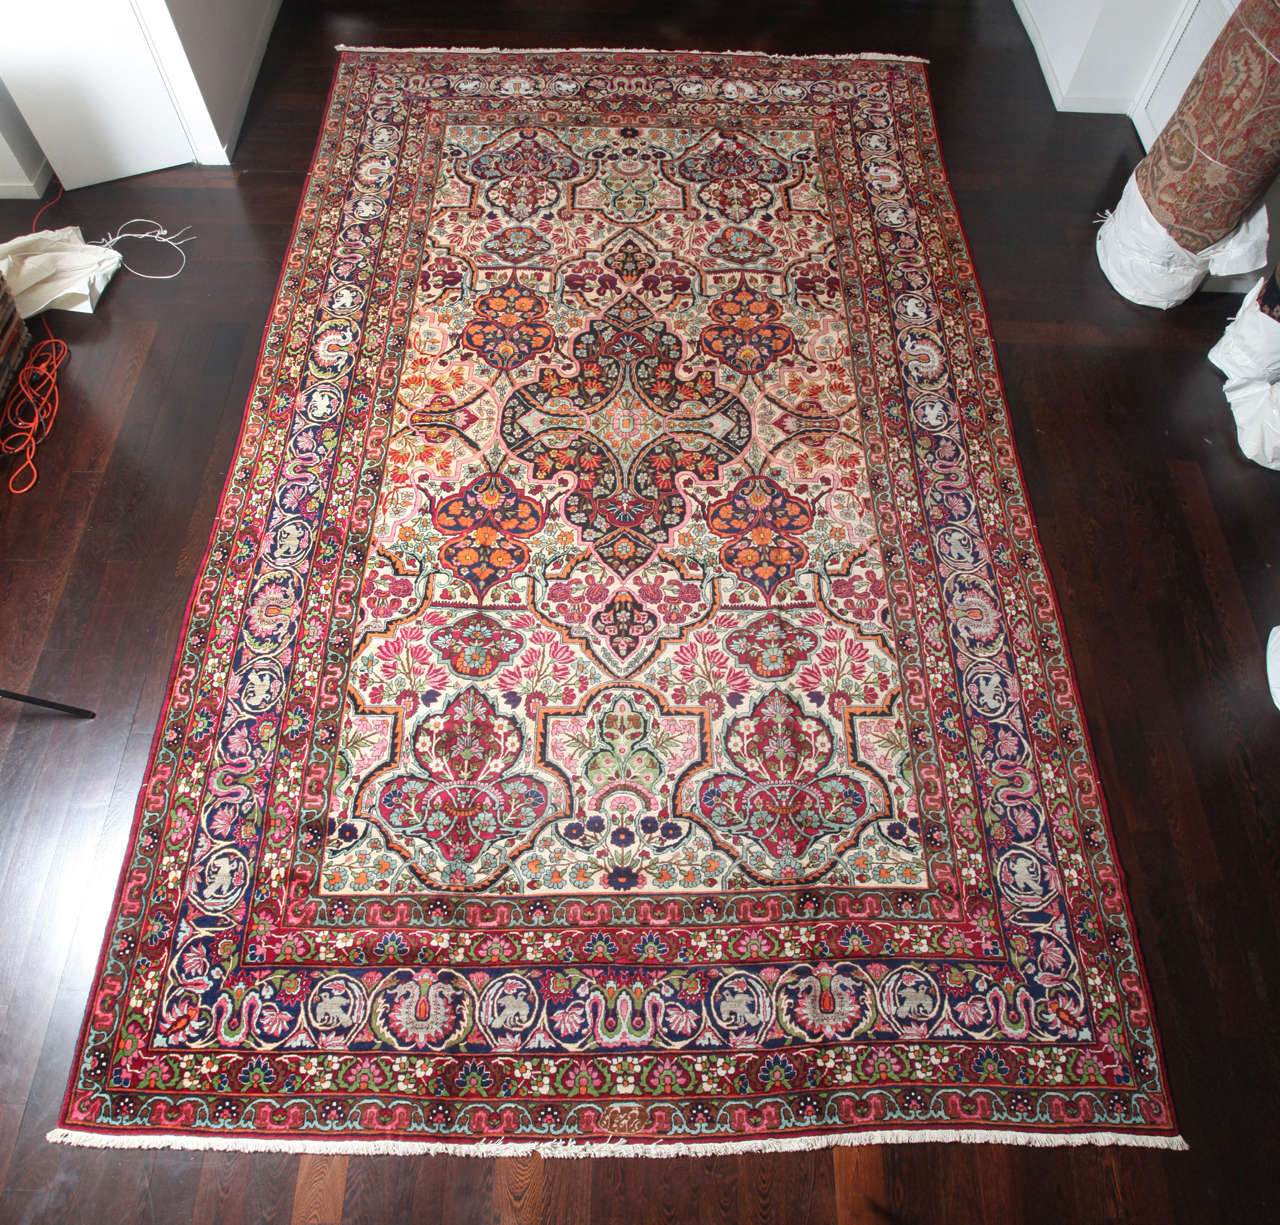 This Persian Yazd carpet circa 1910 consists of a hand-knotted handspun wool pile and natural vegetable dyes. The size is 10' x 16'9